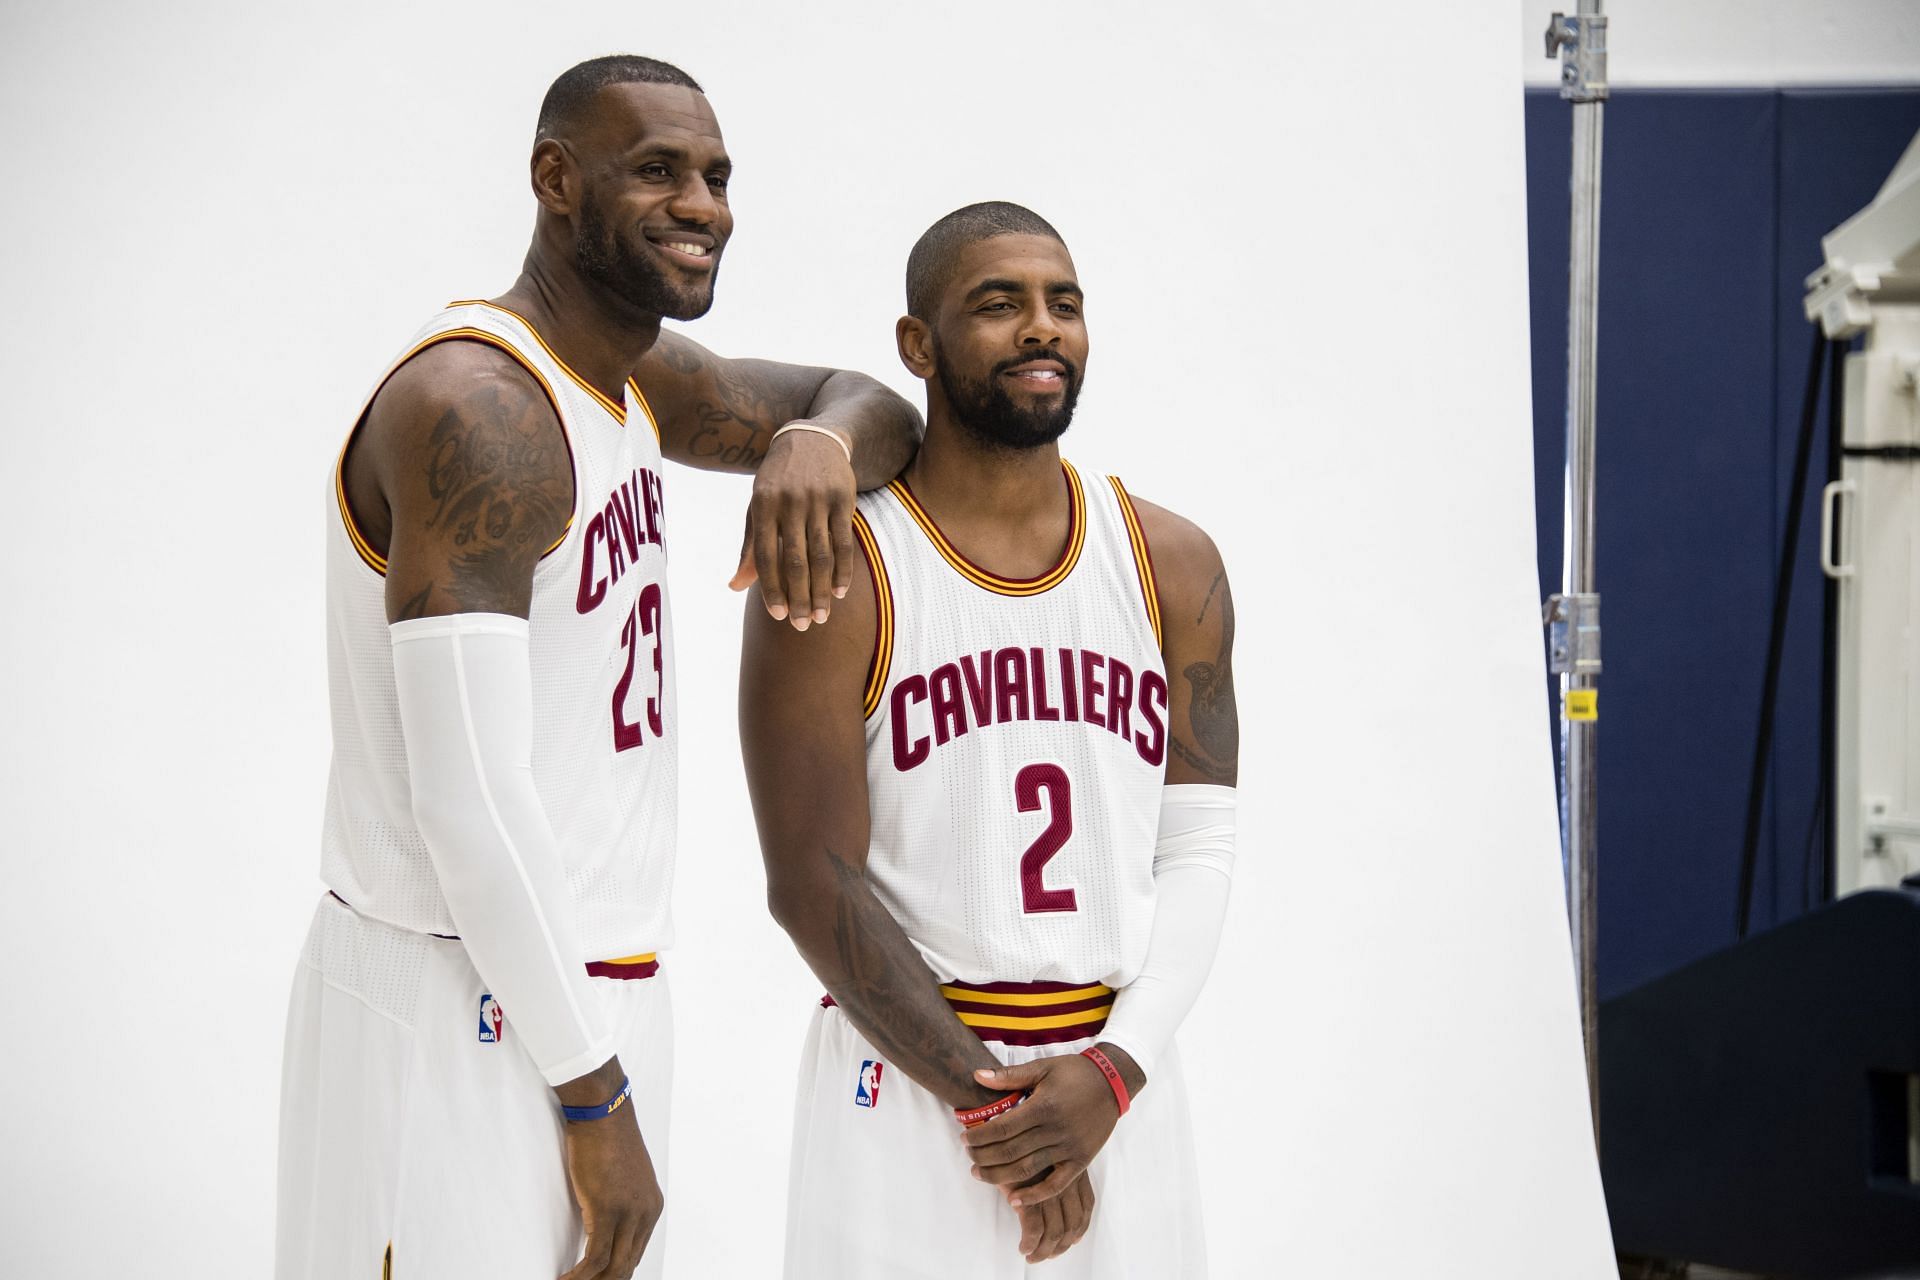 Kyrie Irving and LeBron James during their time with the Cleveland Cavaliers